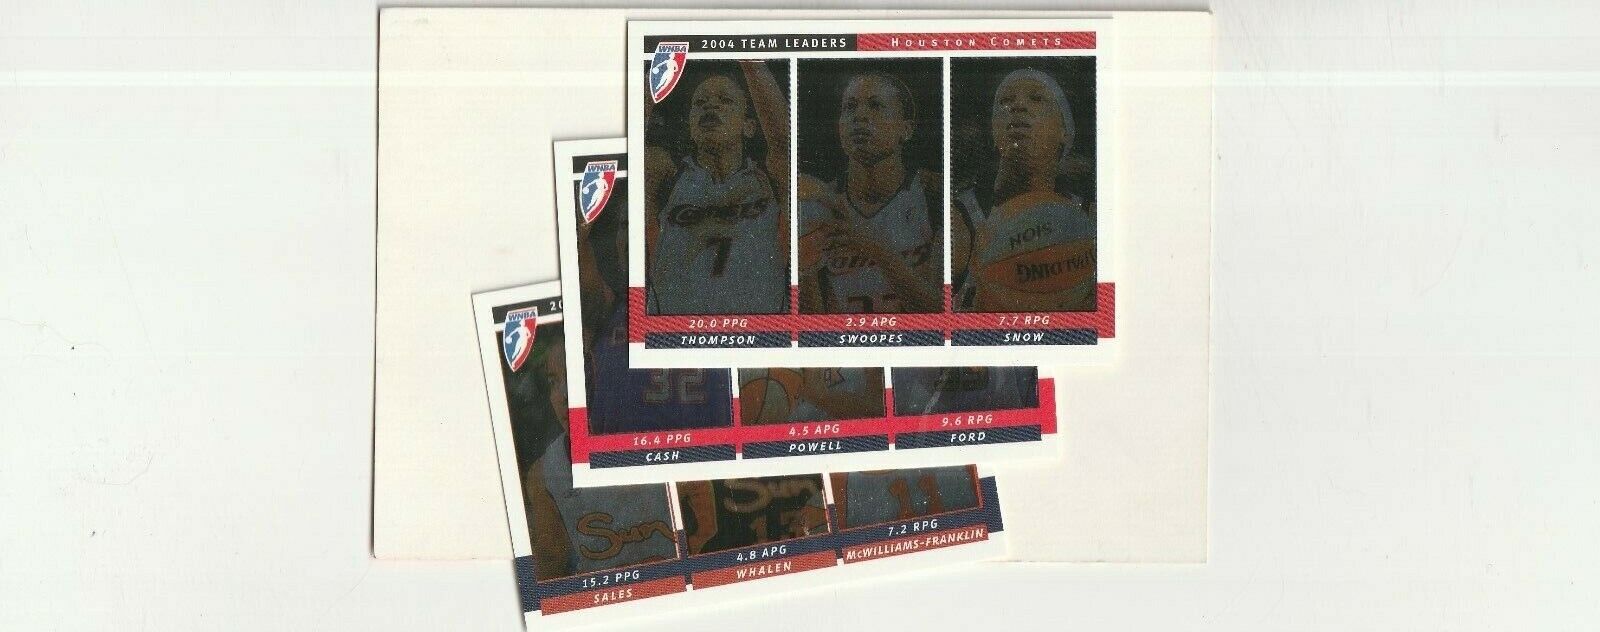 2004 WNBA Trading Cards Lot of 3/TL2/TL3/TL4/Swoopes,Whalen